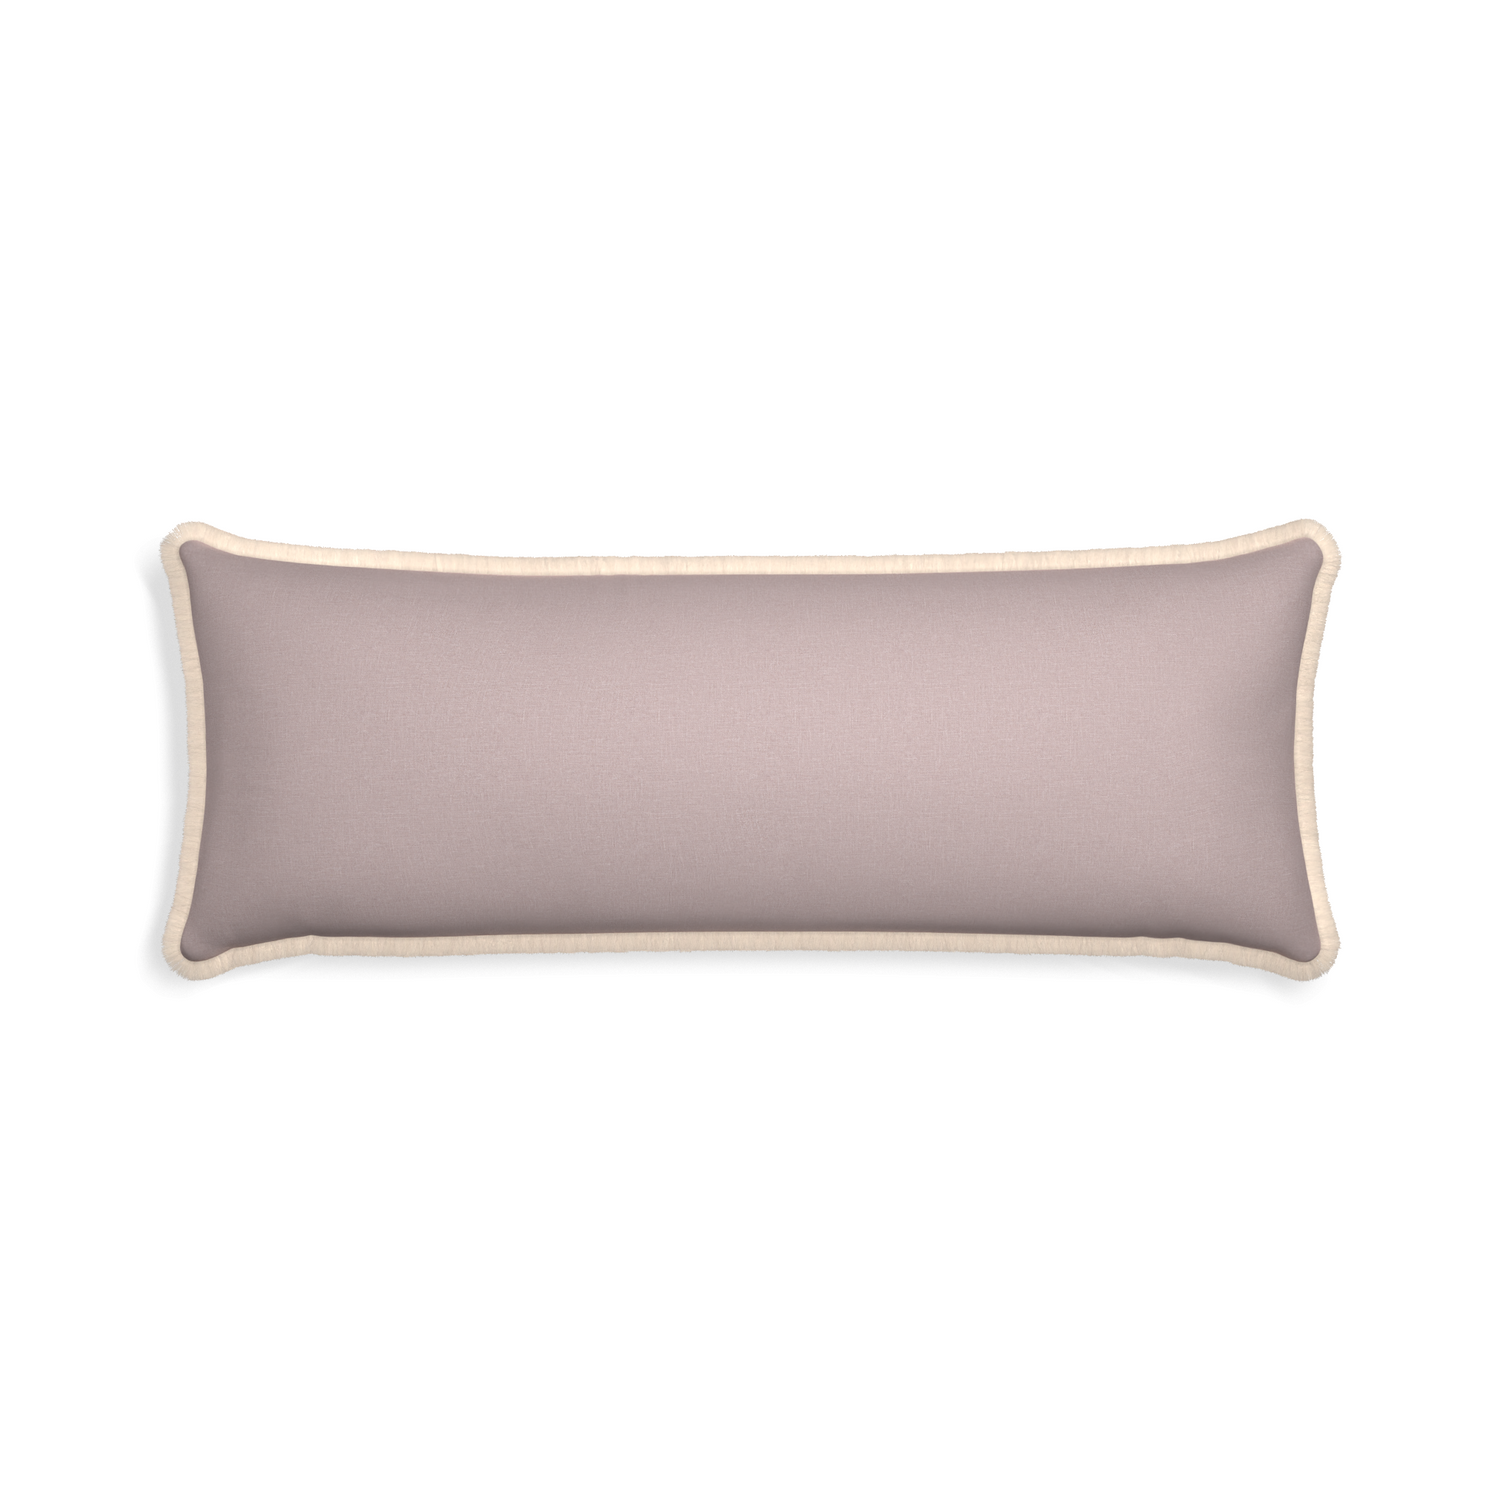 Xl-lumbar orchid custom mauve pinkpillow with cream fringe on white background